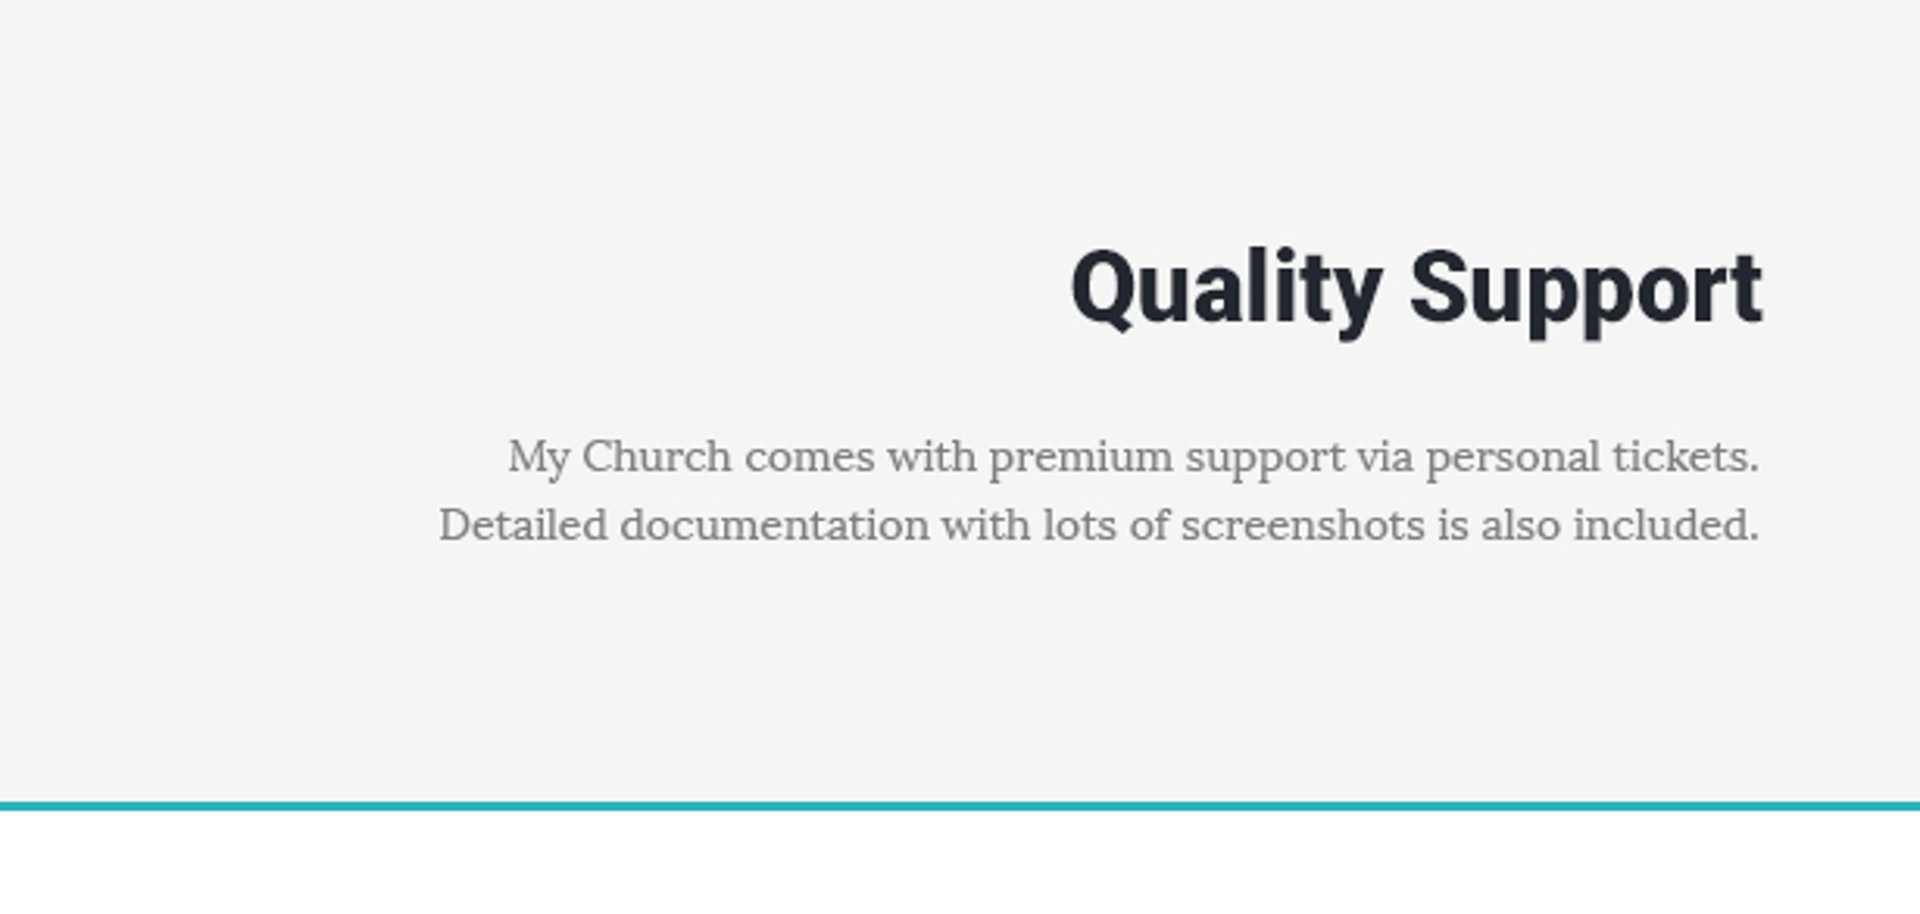 My Church - Religion WordPress Theme with Events, Donations & Sermons - Quality Support